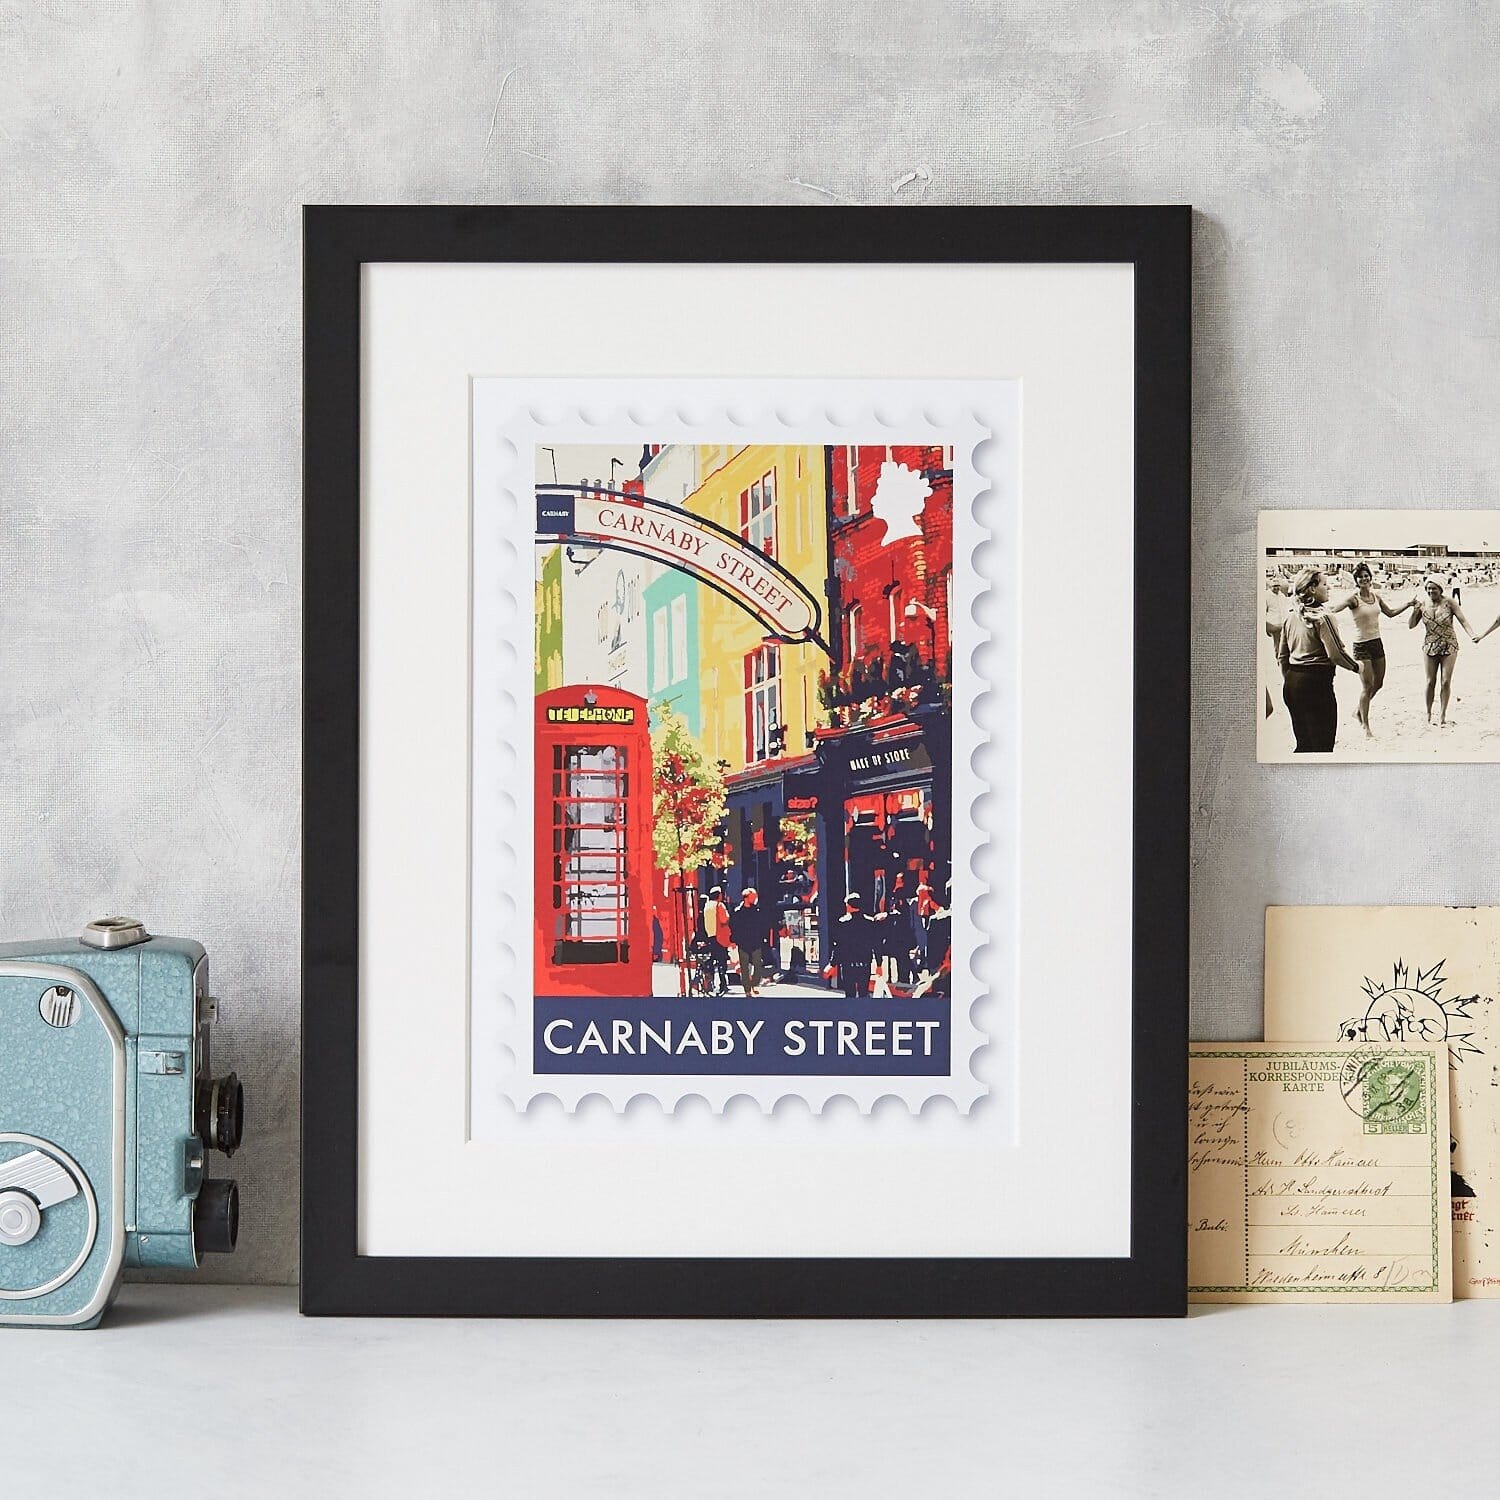 Postage style art print of Carnaby Street in London